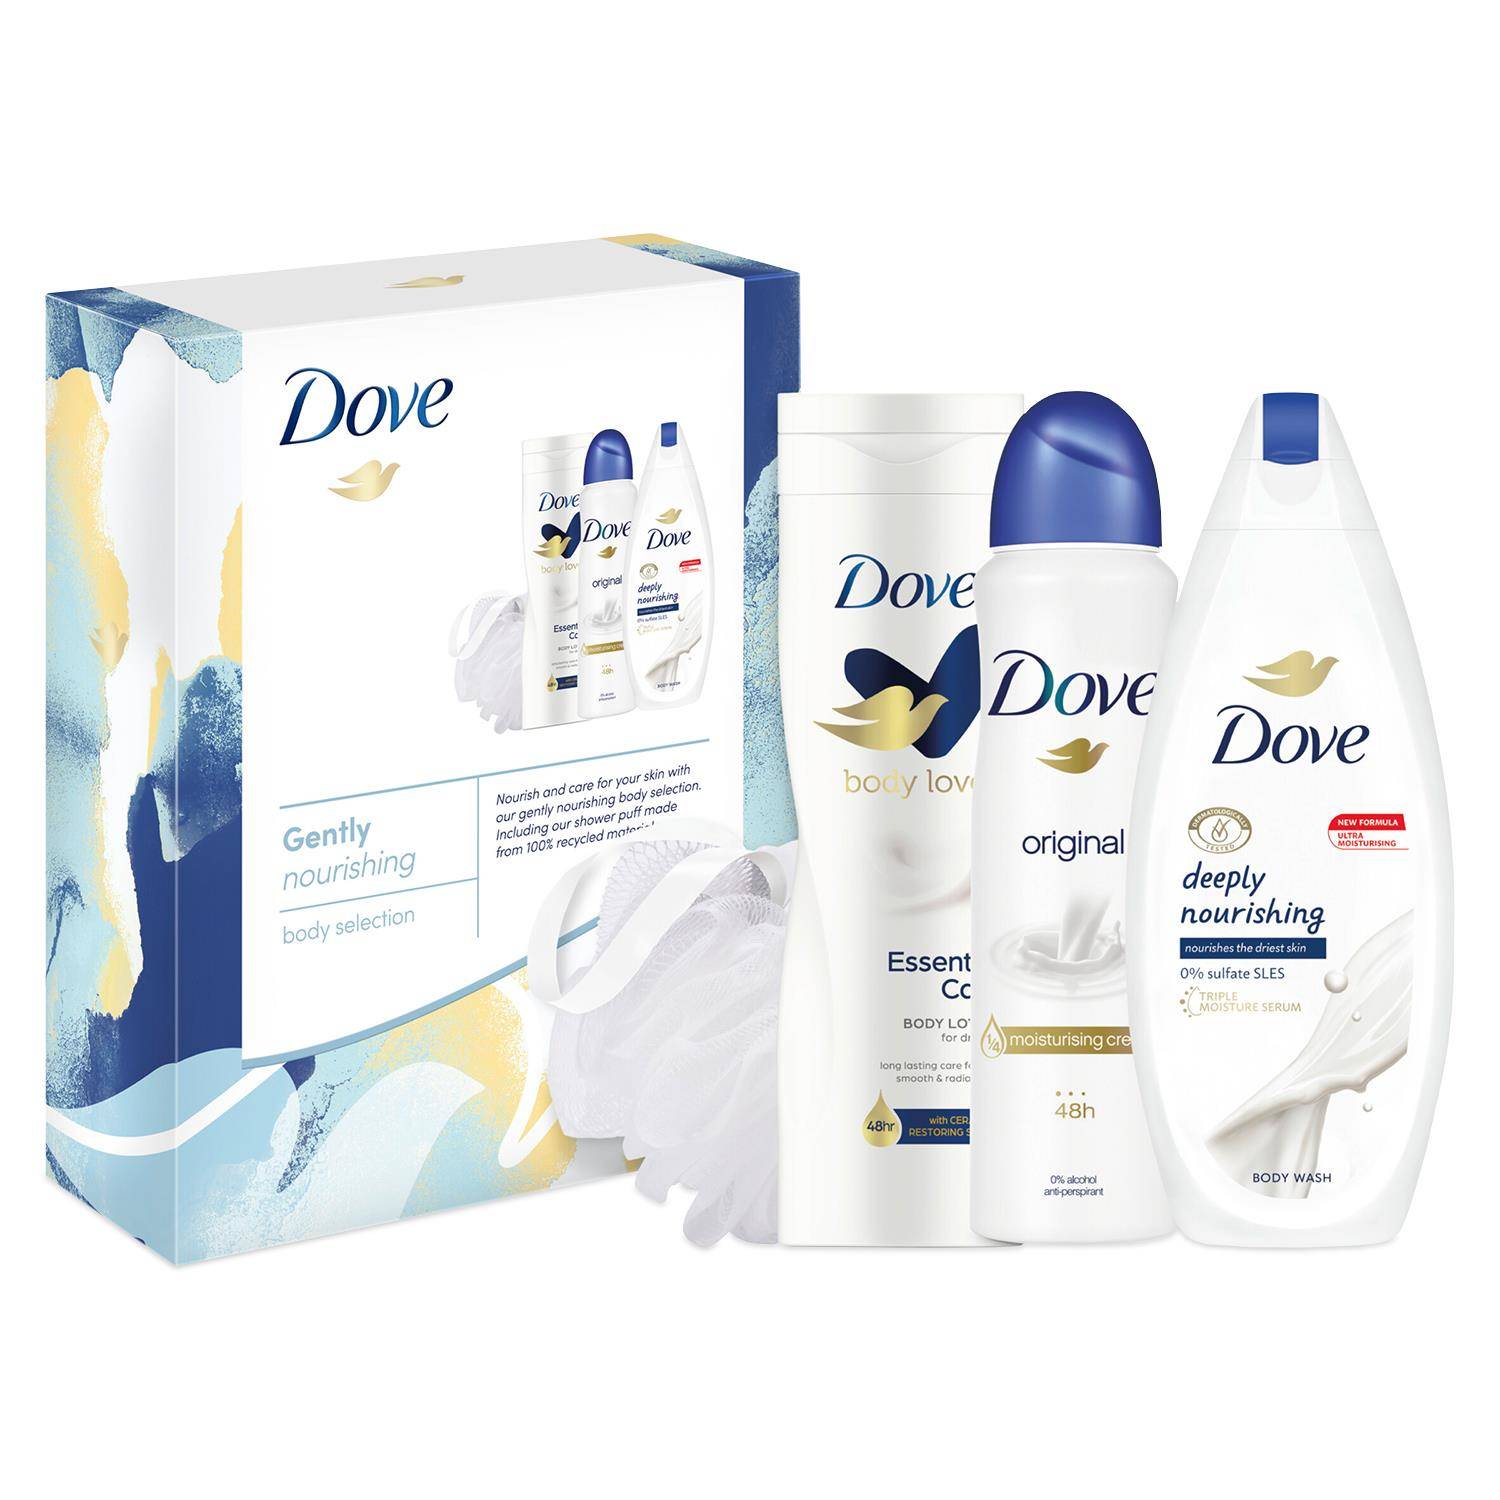 Dove Gently Nourishing Body Selection 3pcs Gift Set For Her with Shower Puff